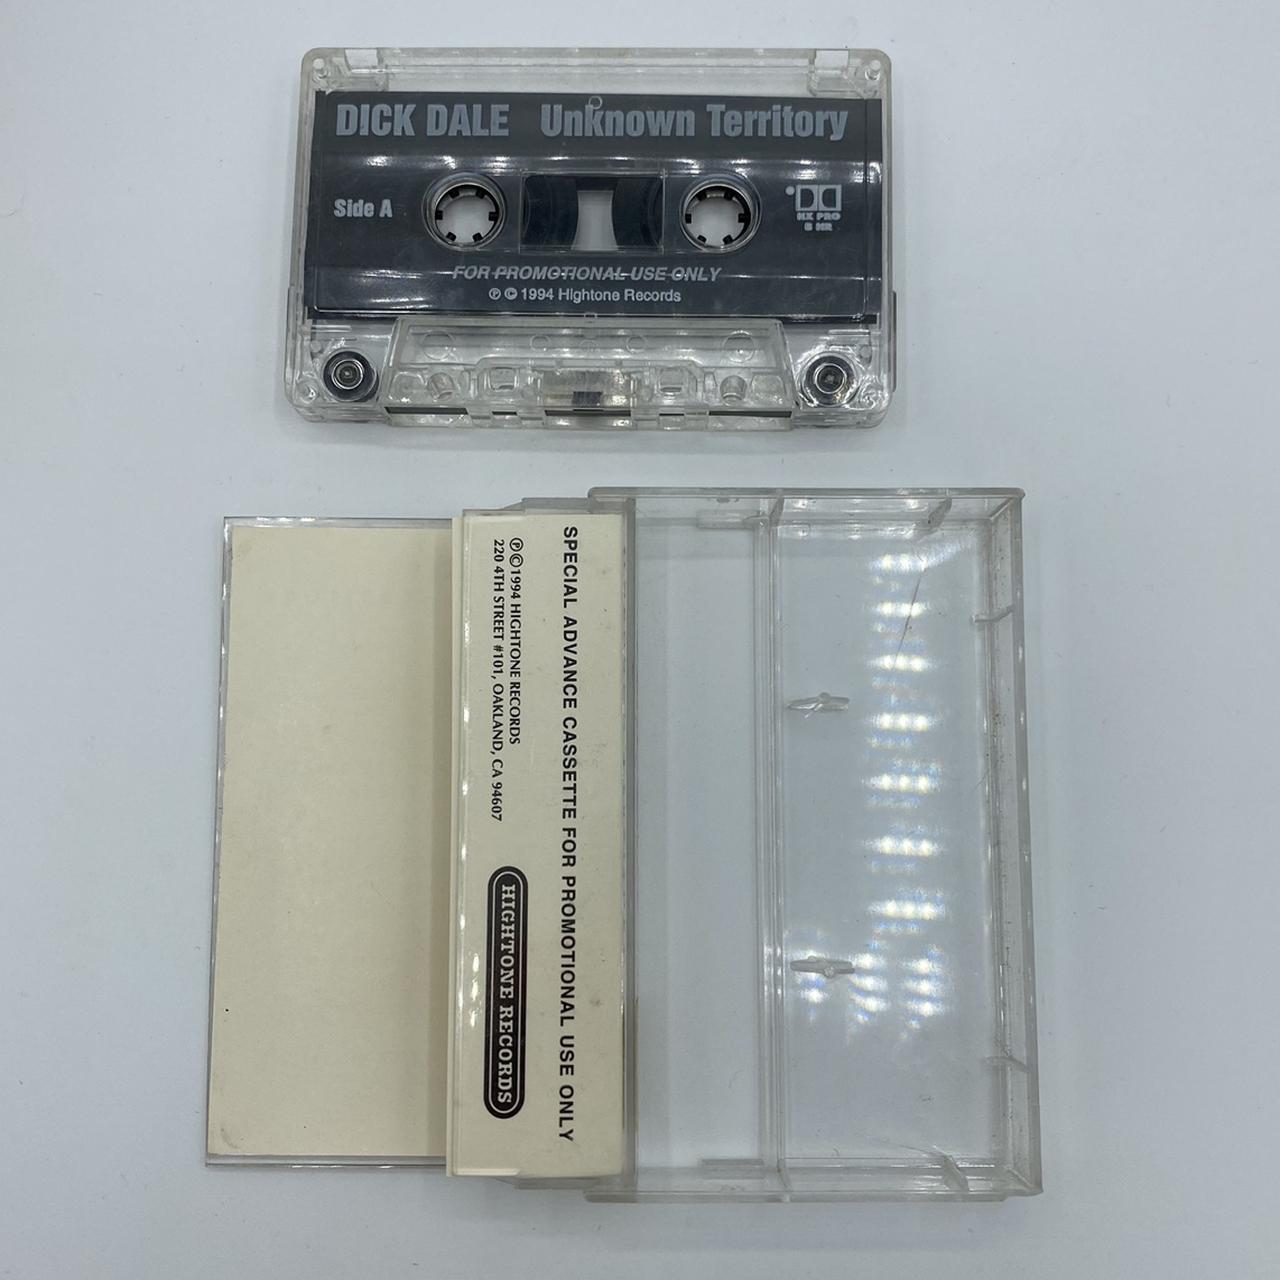 RARE Unknown Territory by Dick Dale Cassette...